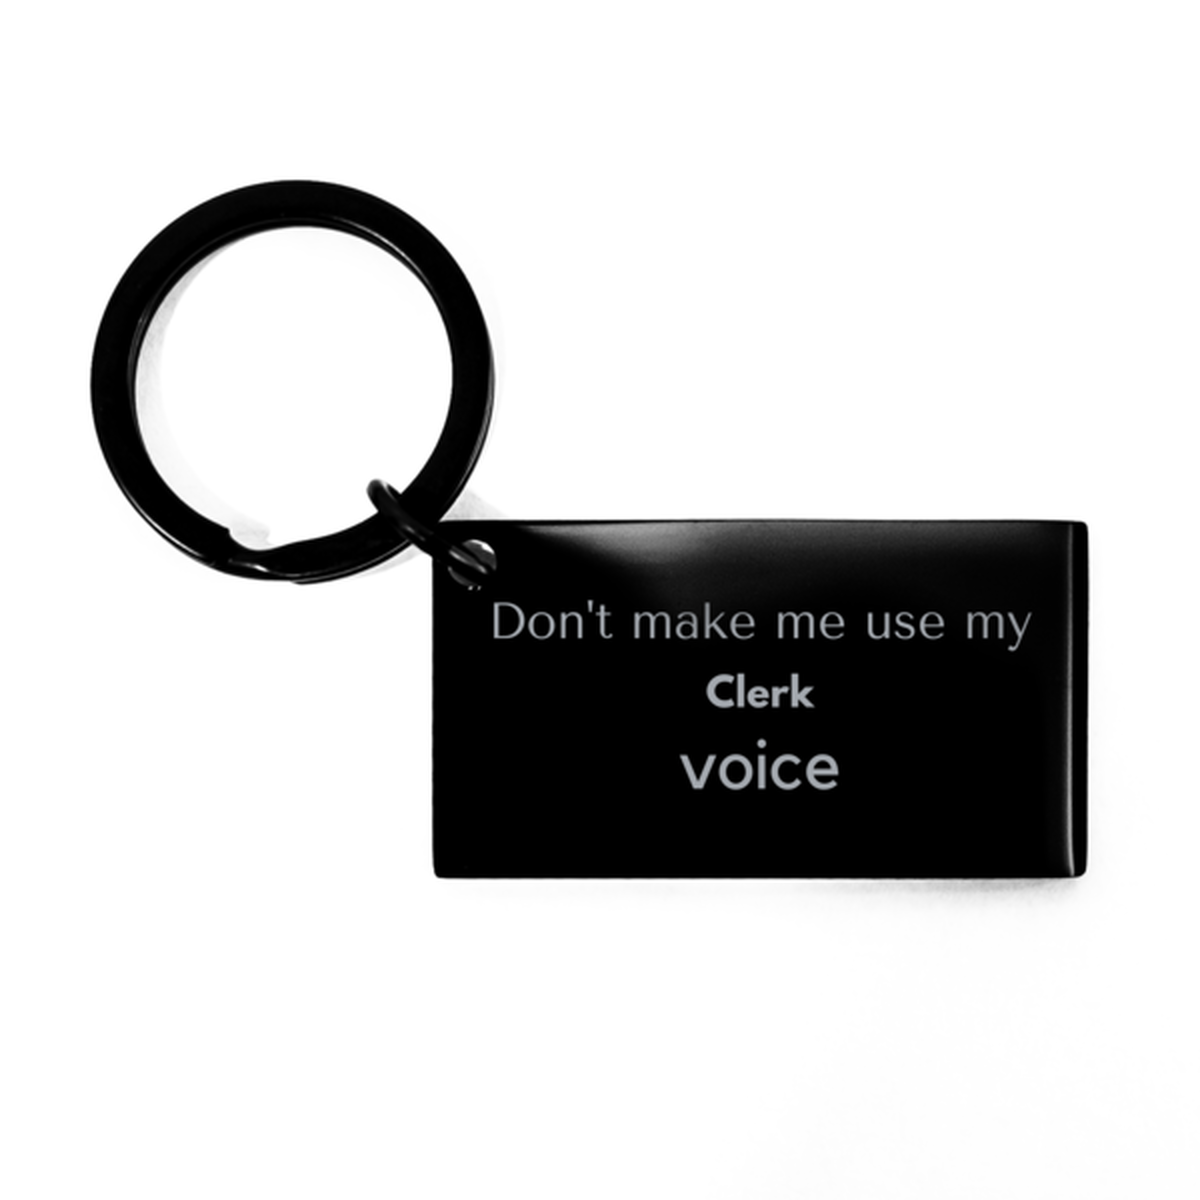 Don't make me use my Clerk voice, Sarcasm Clerk Gifts, Christmas Clerk Keychain Birthday Unique Gifts For Clerk Coworkers, Men, Women, Colleague, Friends